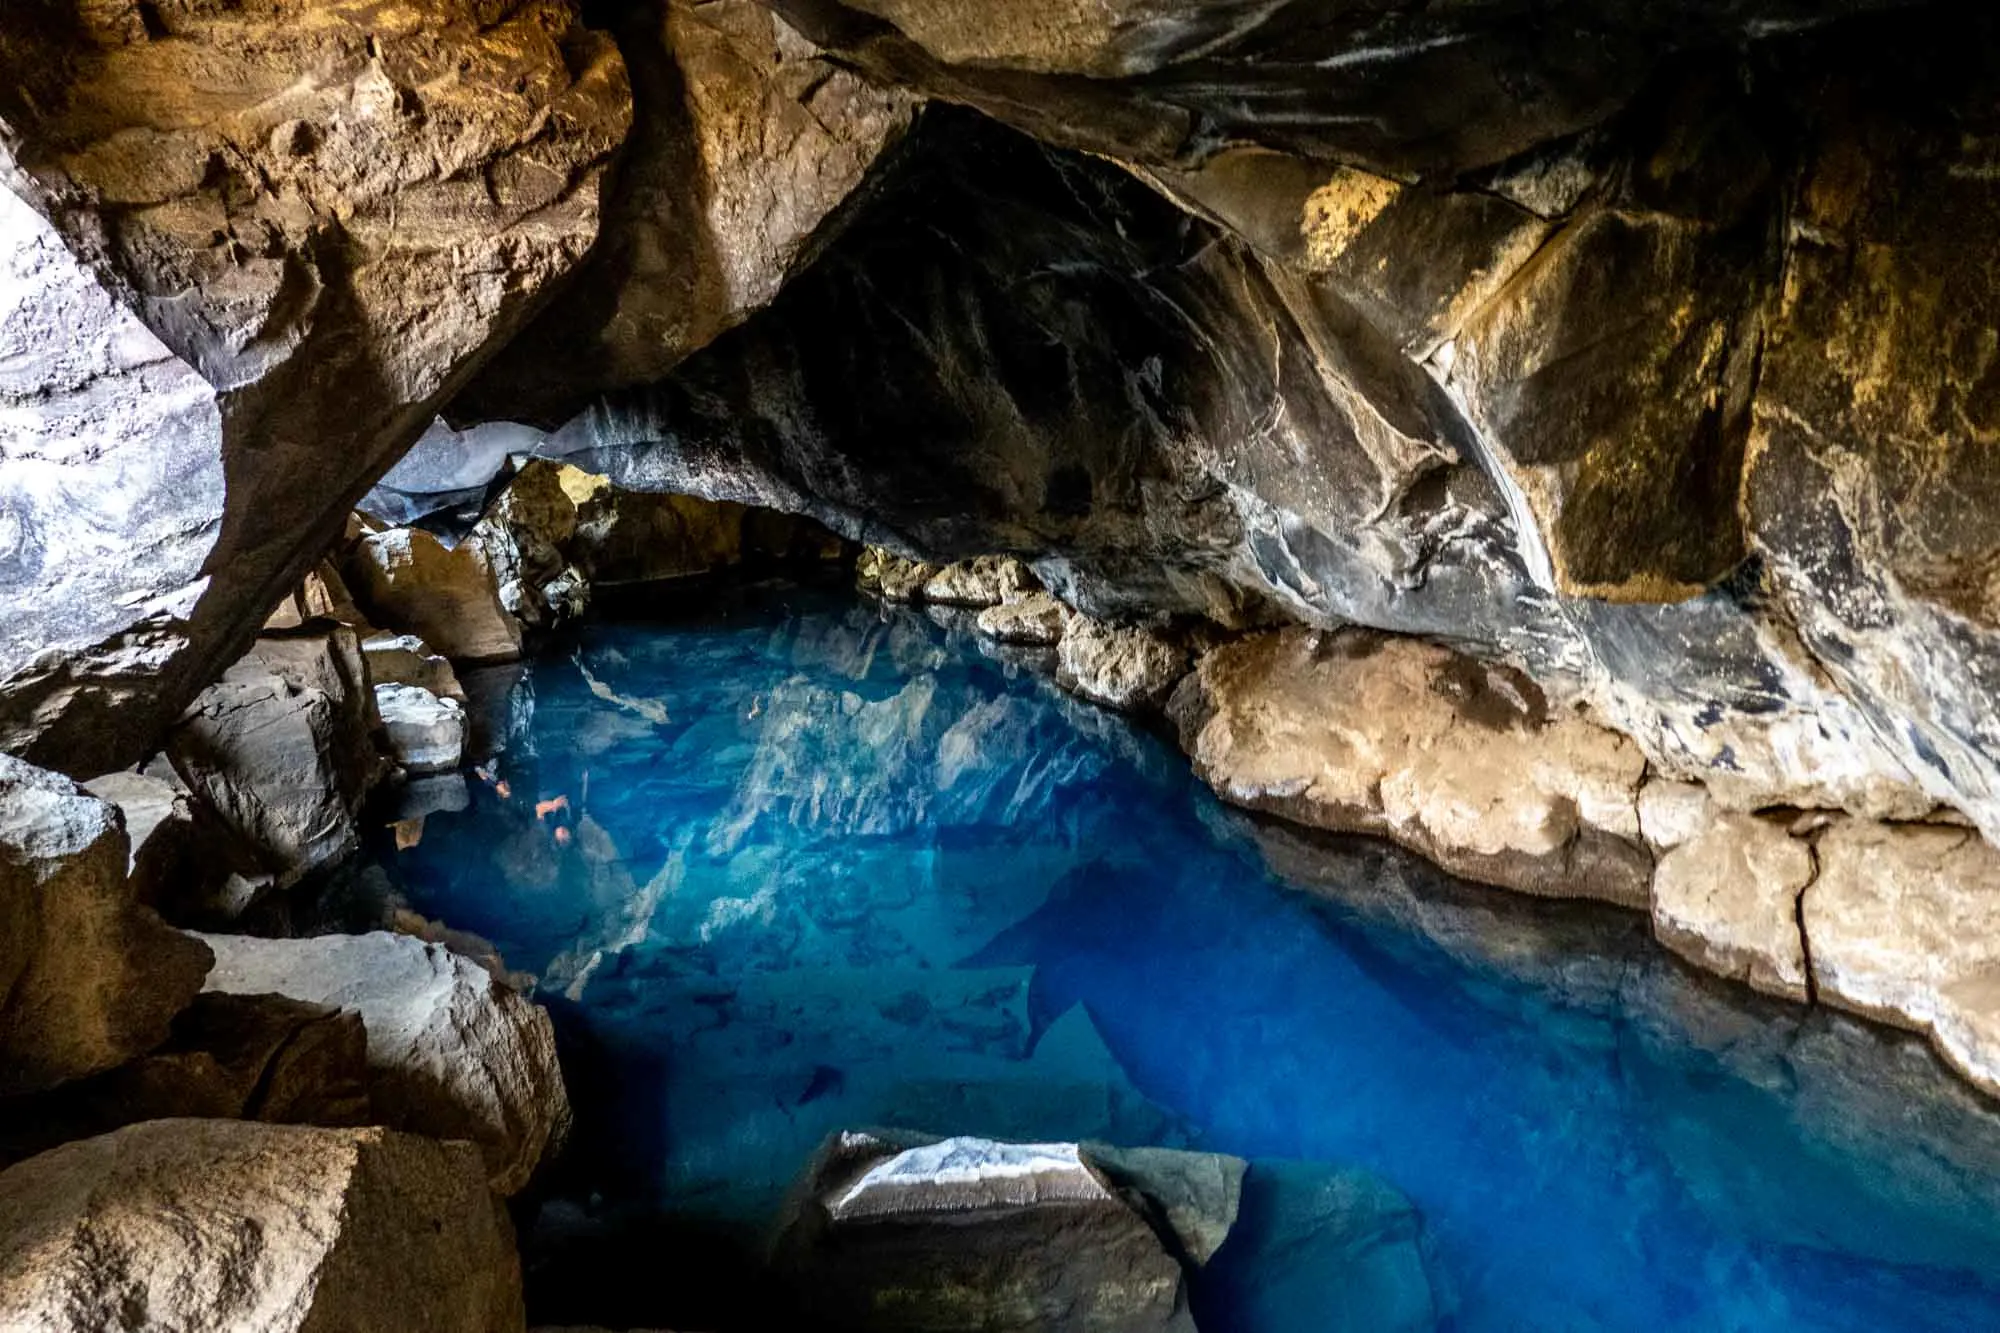 Blue water in the interior of the Grjotagja cave